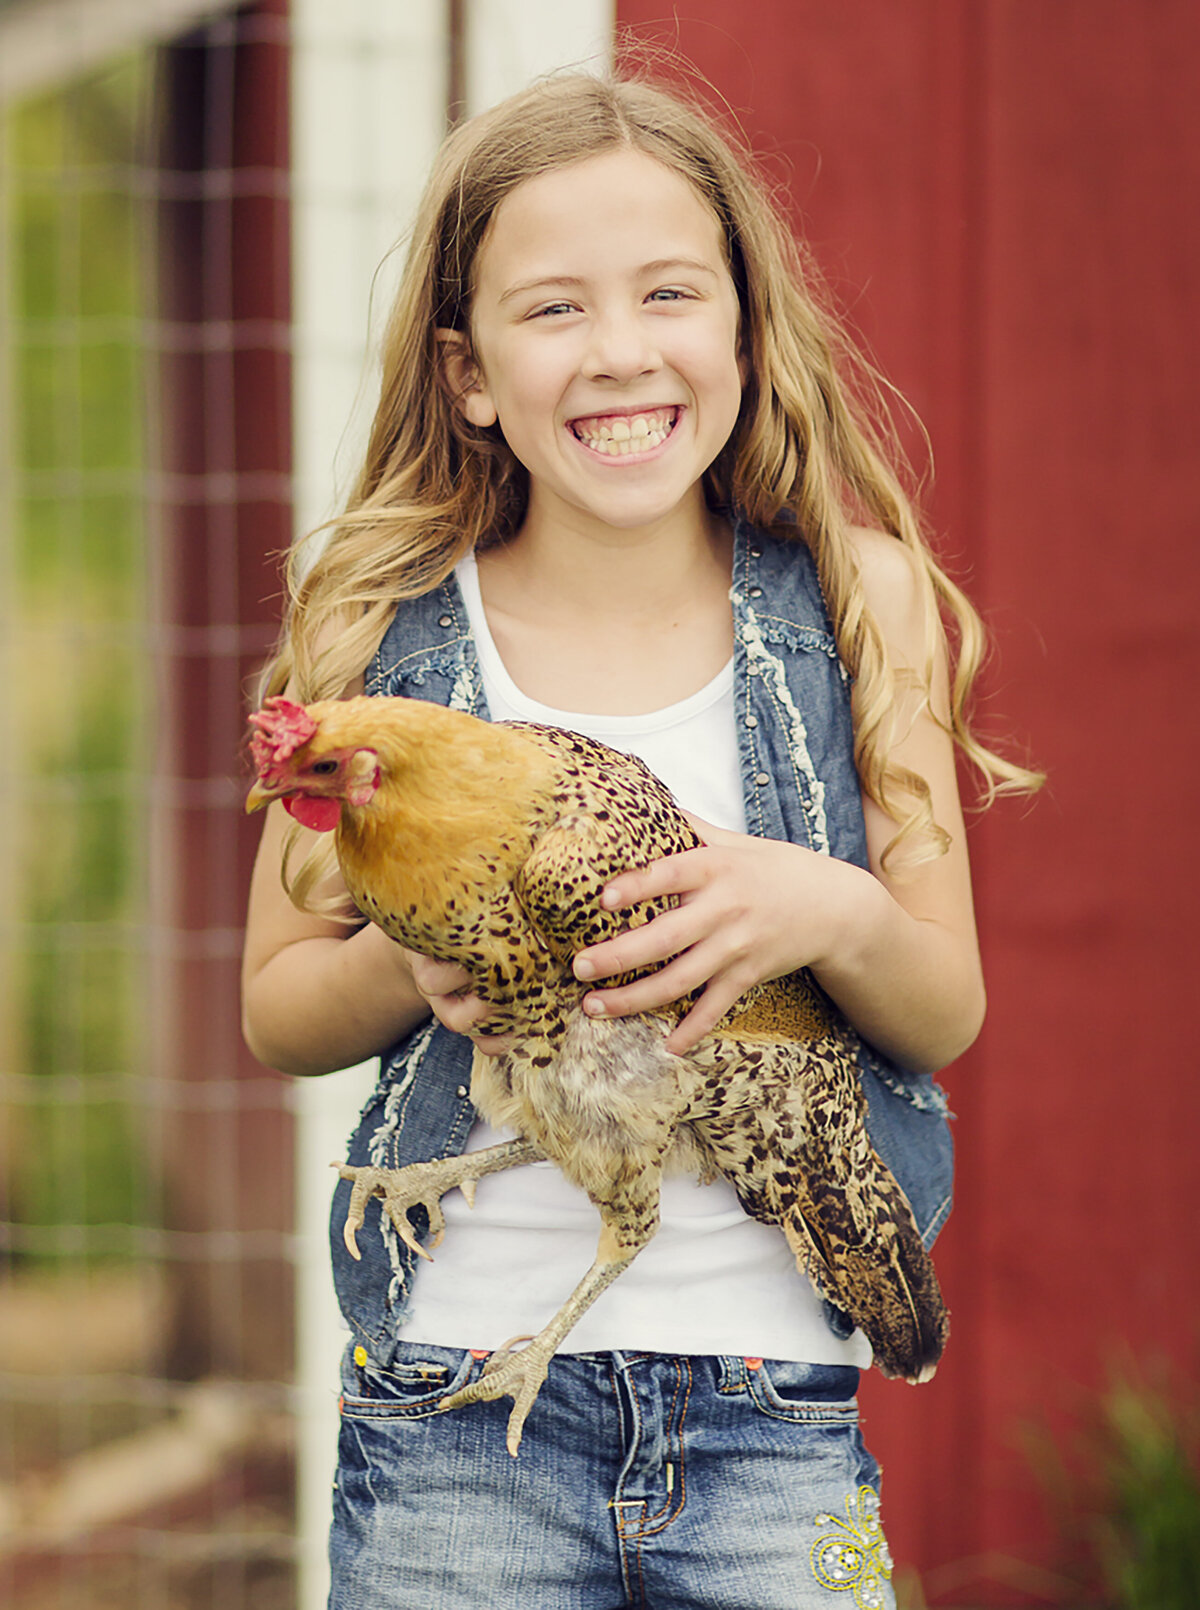 girl-with-chicken